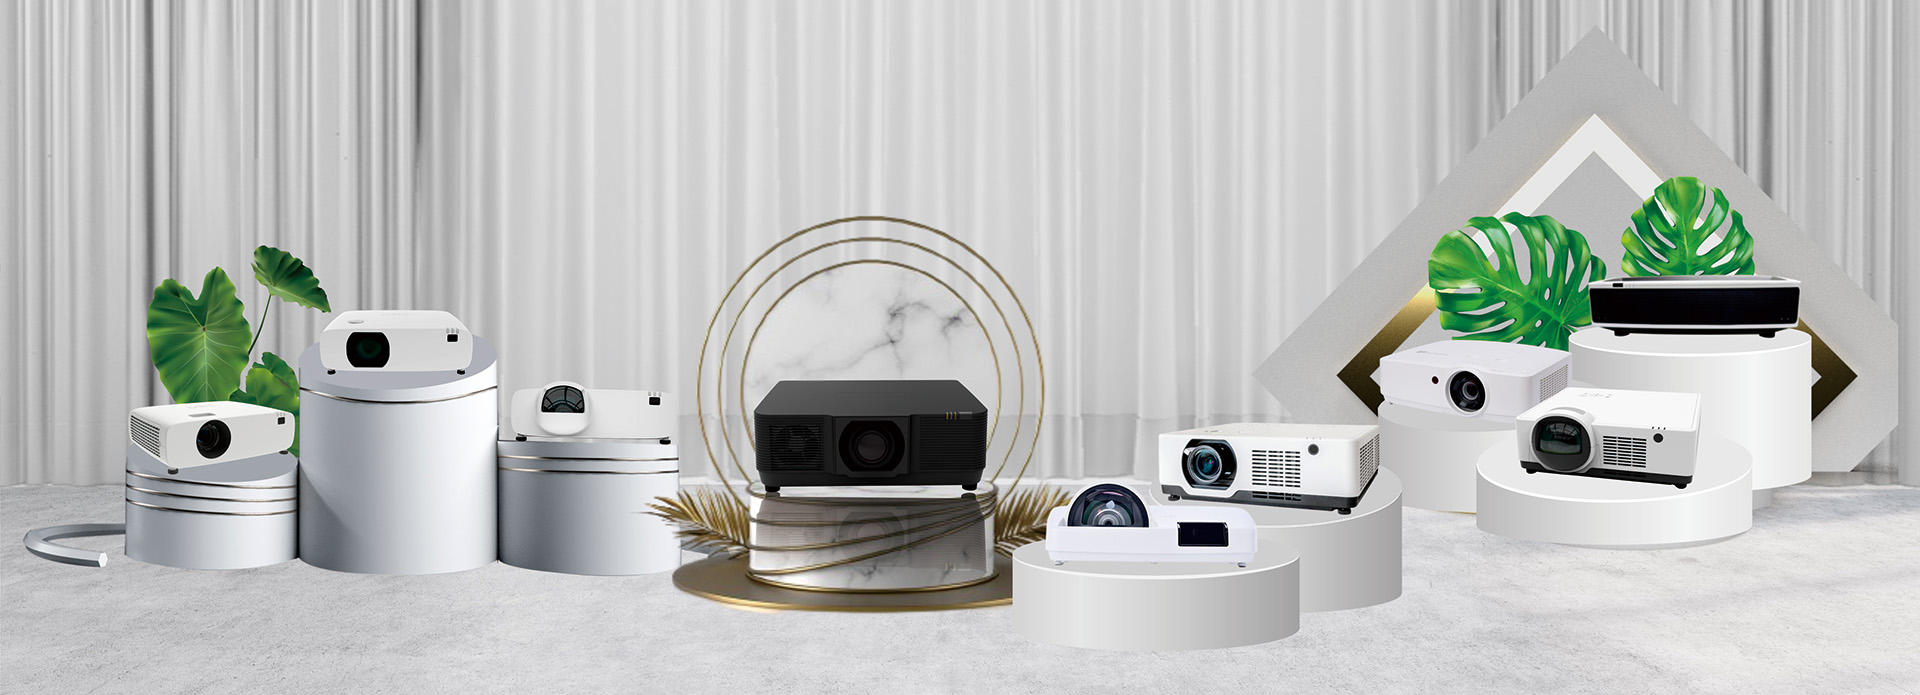 No Matter What Kind of Space, We Can Provide You the Right Projector.